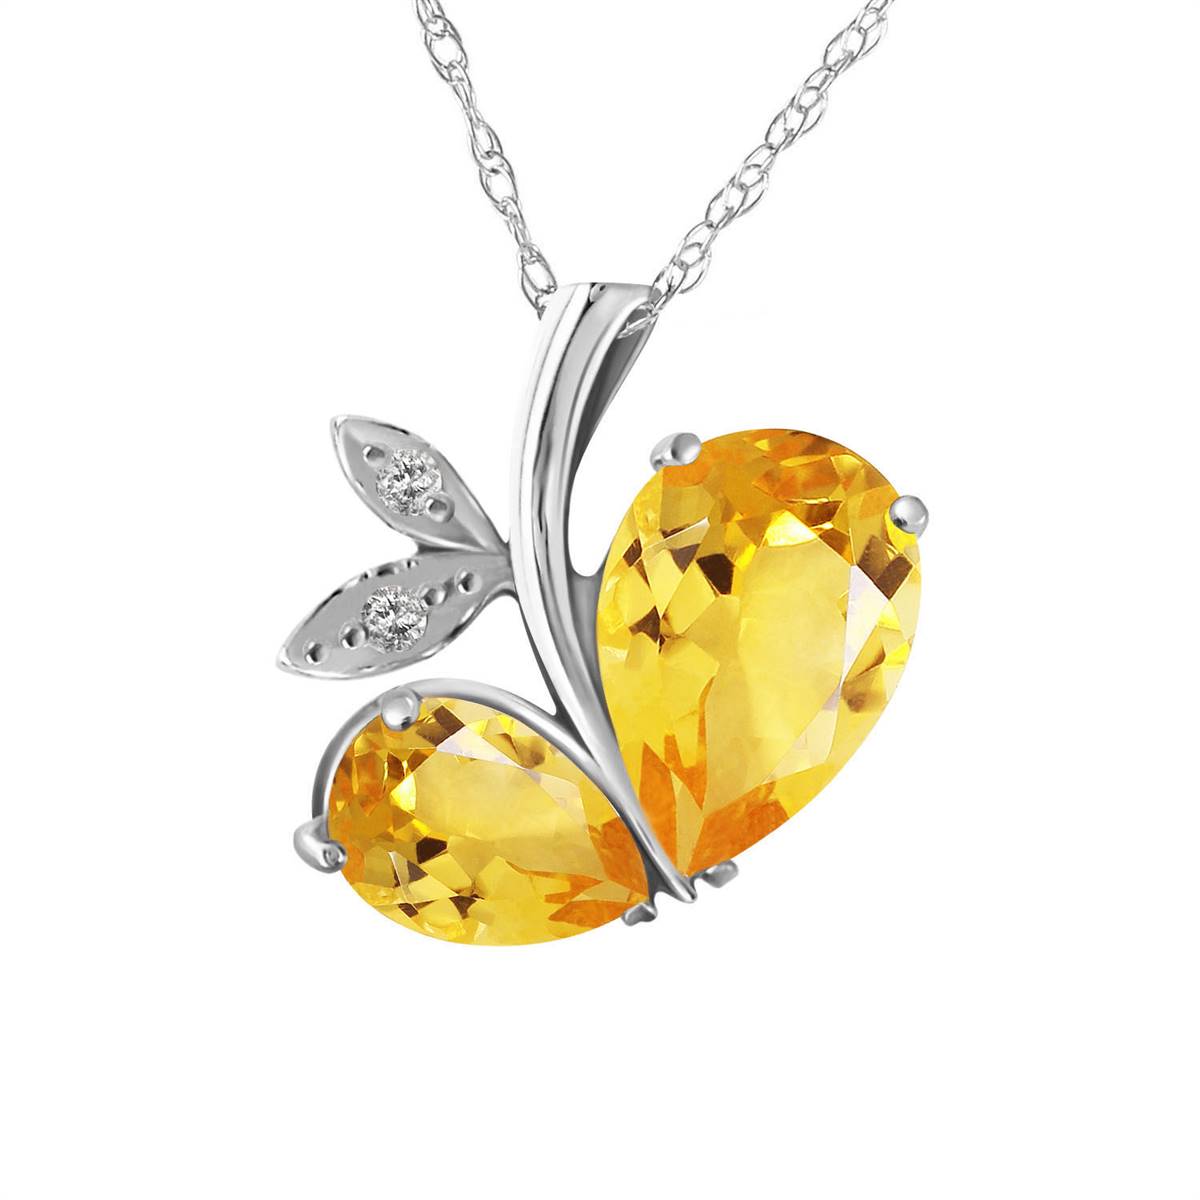 14K Solid White Gold Modern Heart Necklace w/ Natural Diamond & Citrines